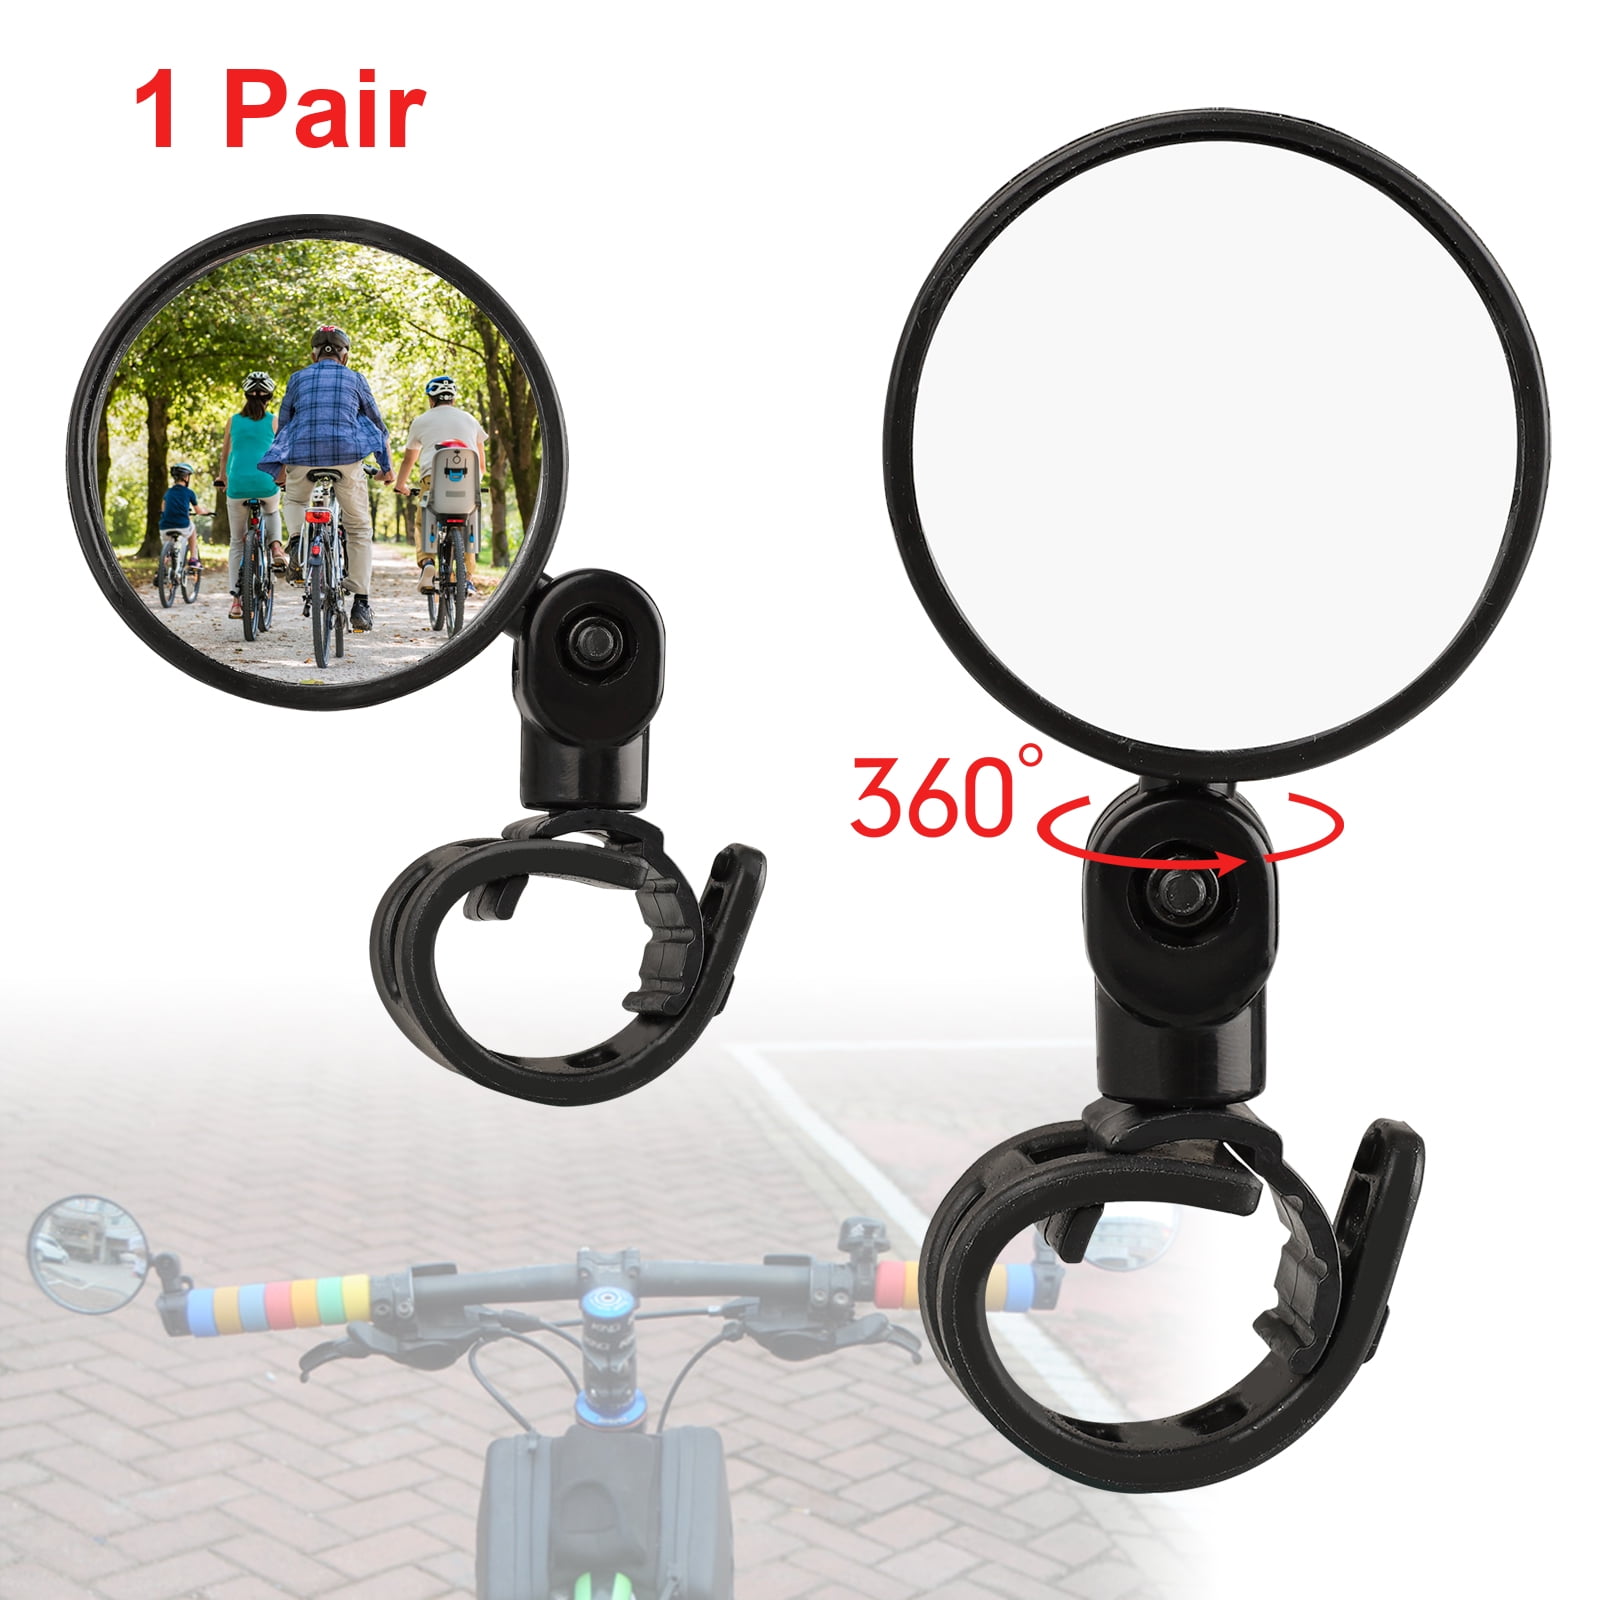 1 Pack Rotaty Handlebar Glass Rear View Mirror For Road Bike Bicycle Portable US 